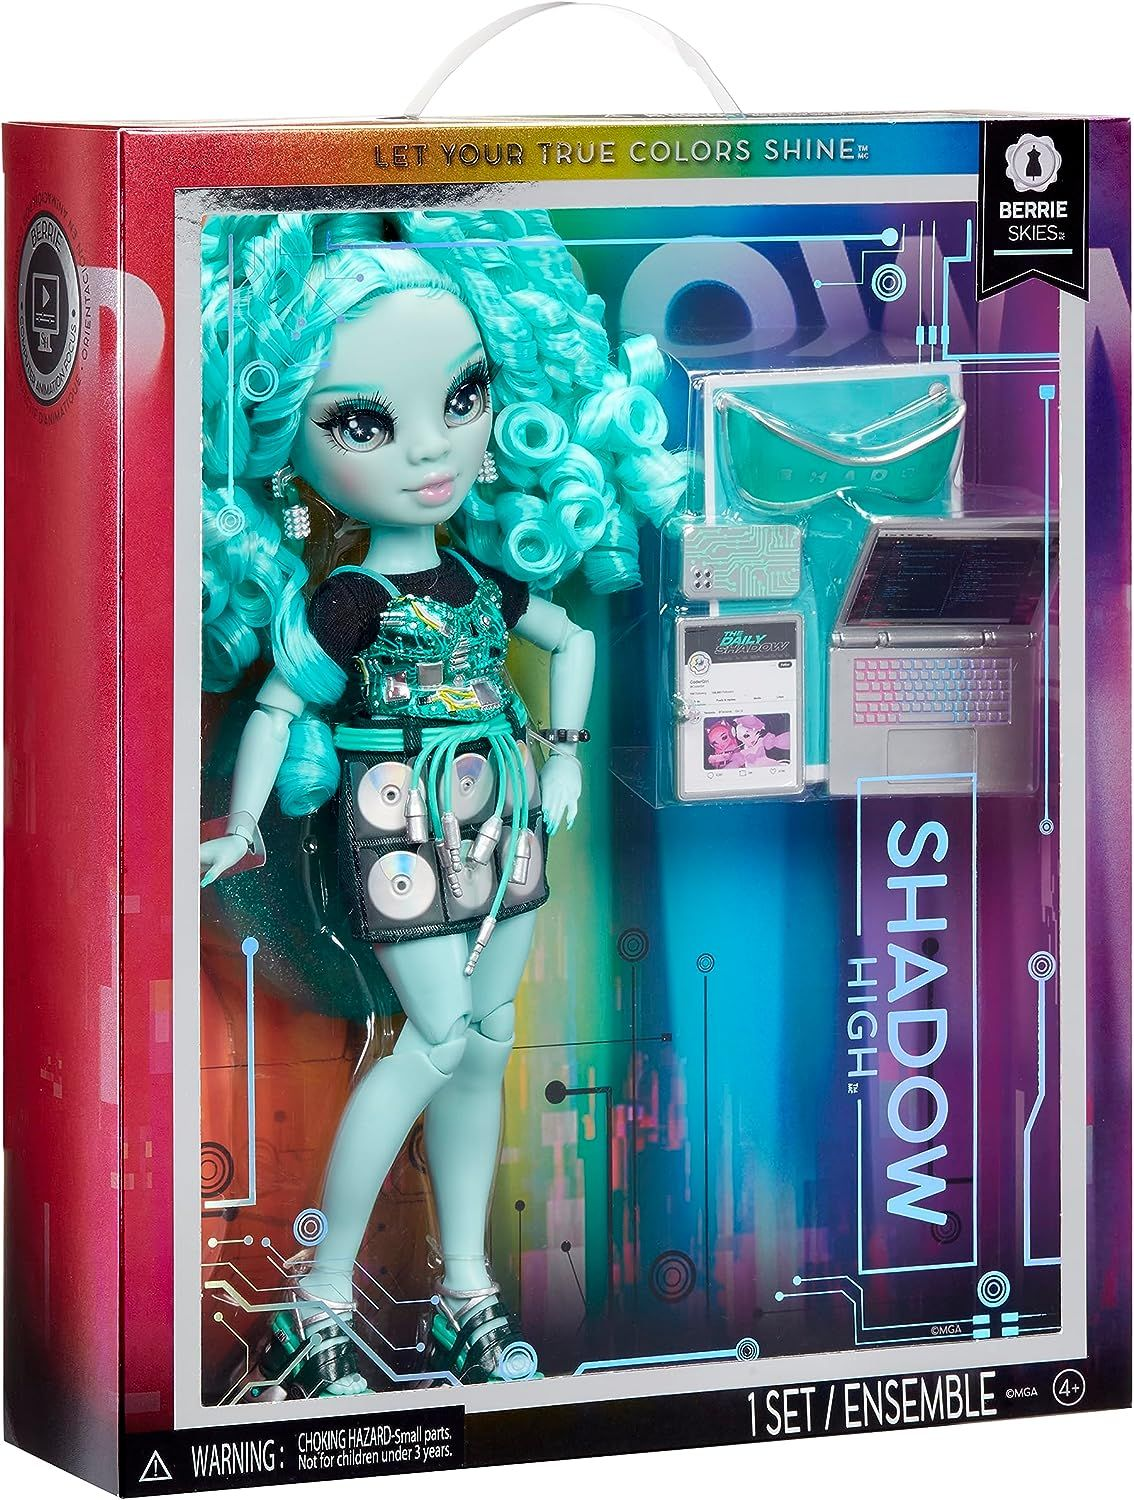 Rainbow High Shadow High Berrie - Blue Fashion Doll Outfit & 10+ Colorful Play Accessories